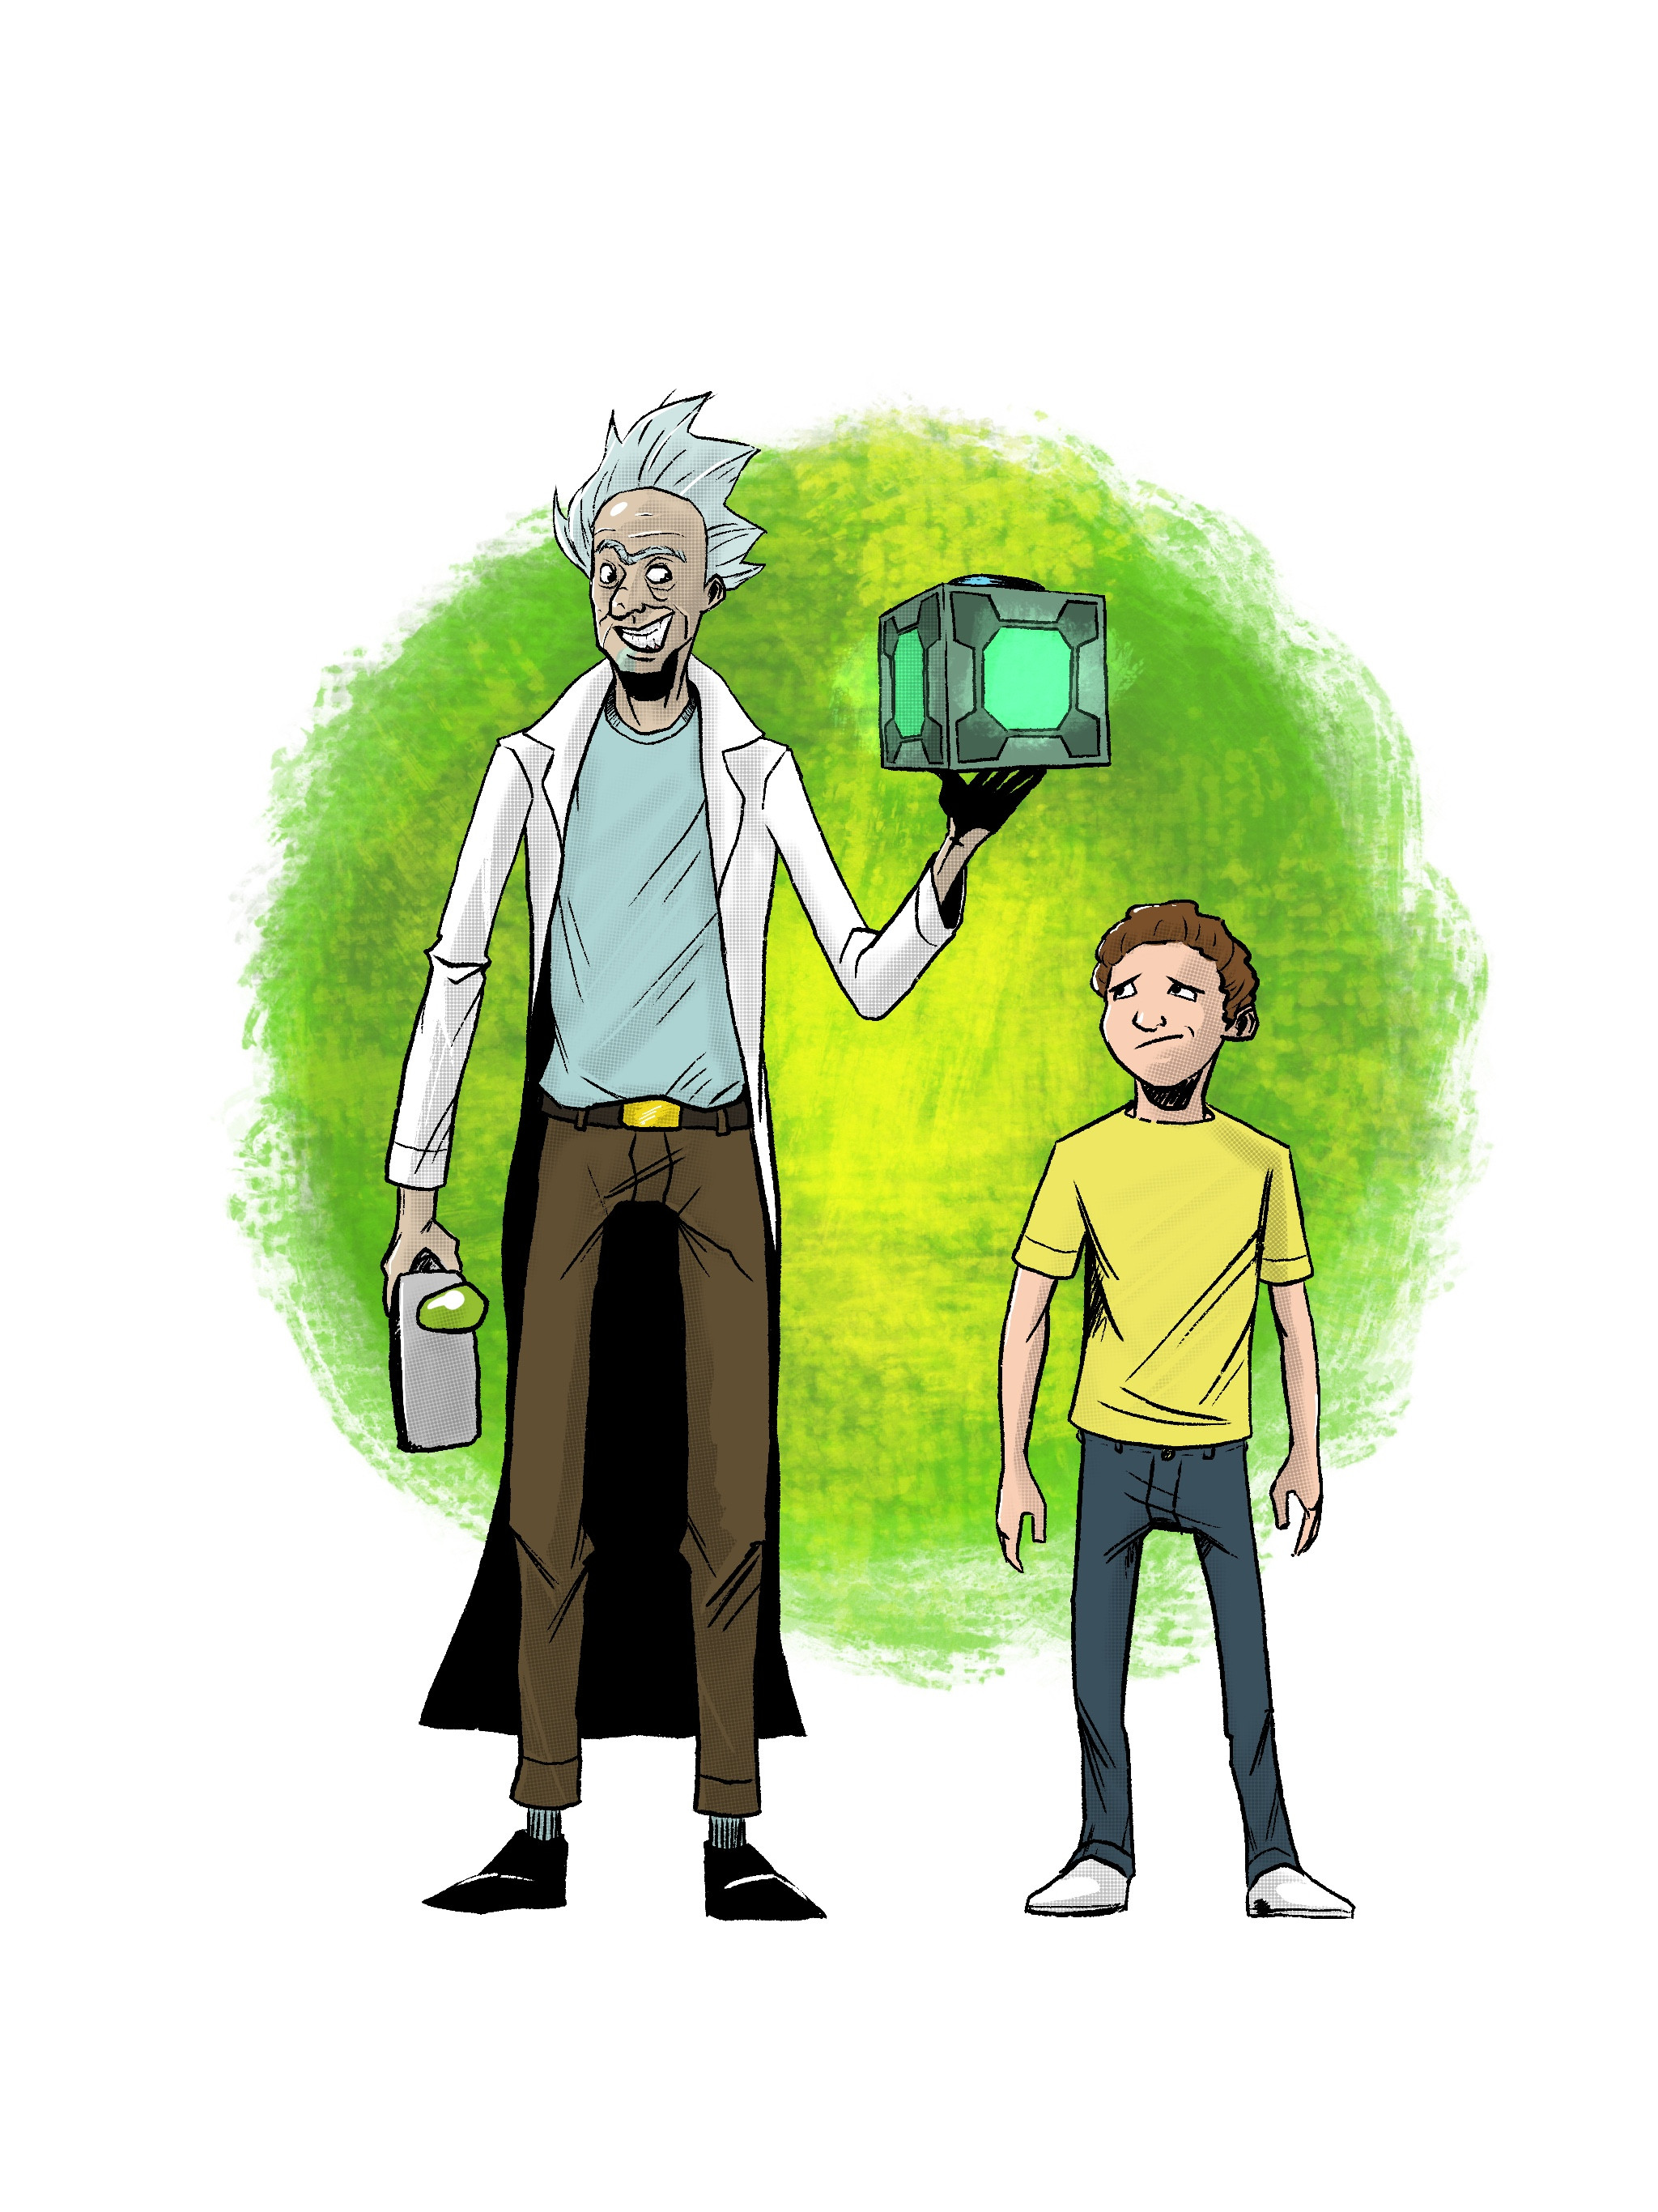 Rick and Morty - Digital in Procreate